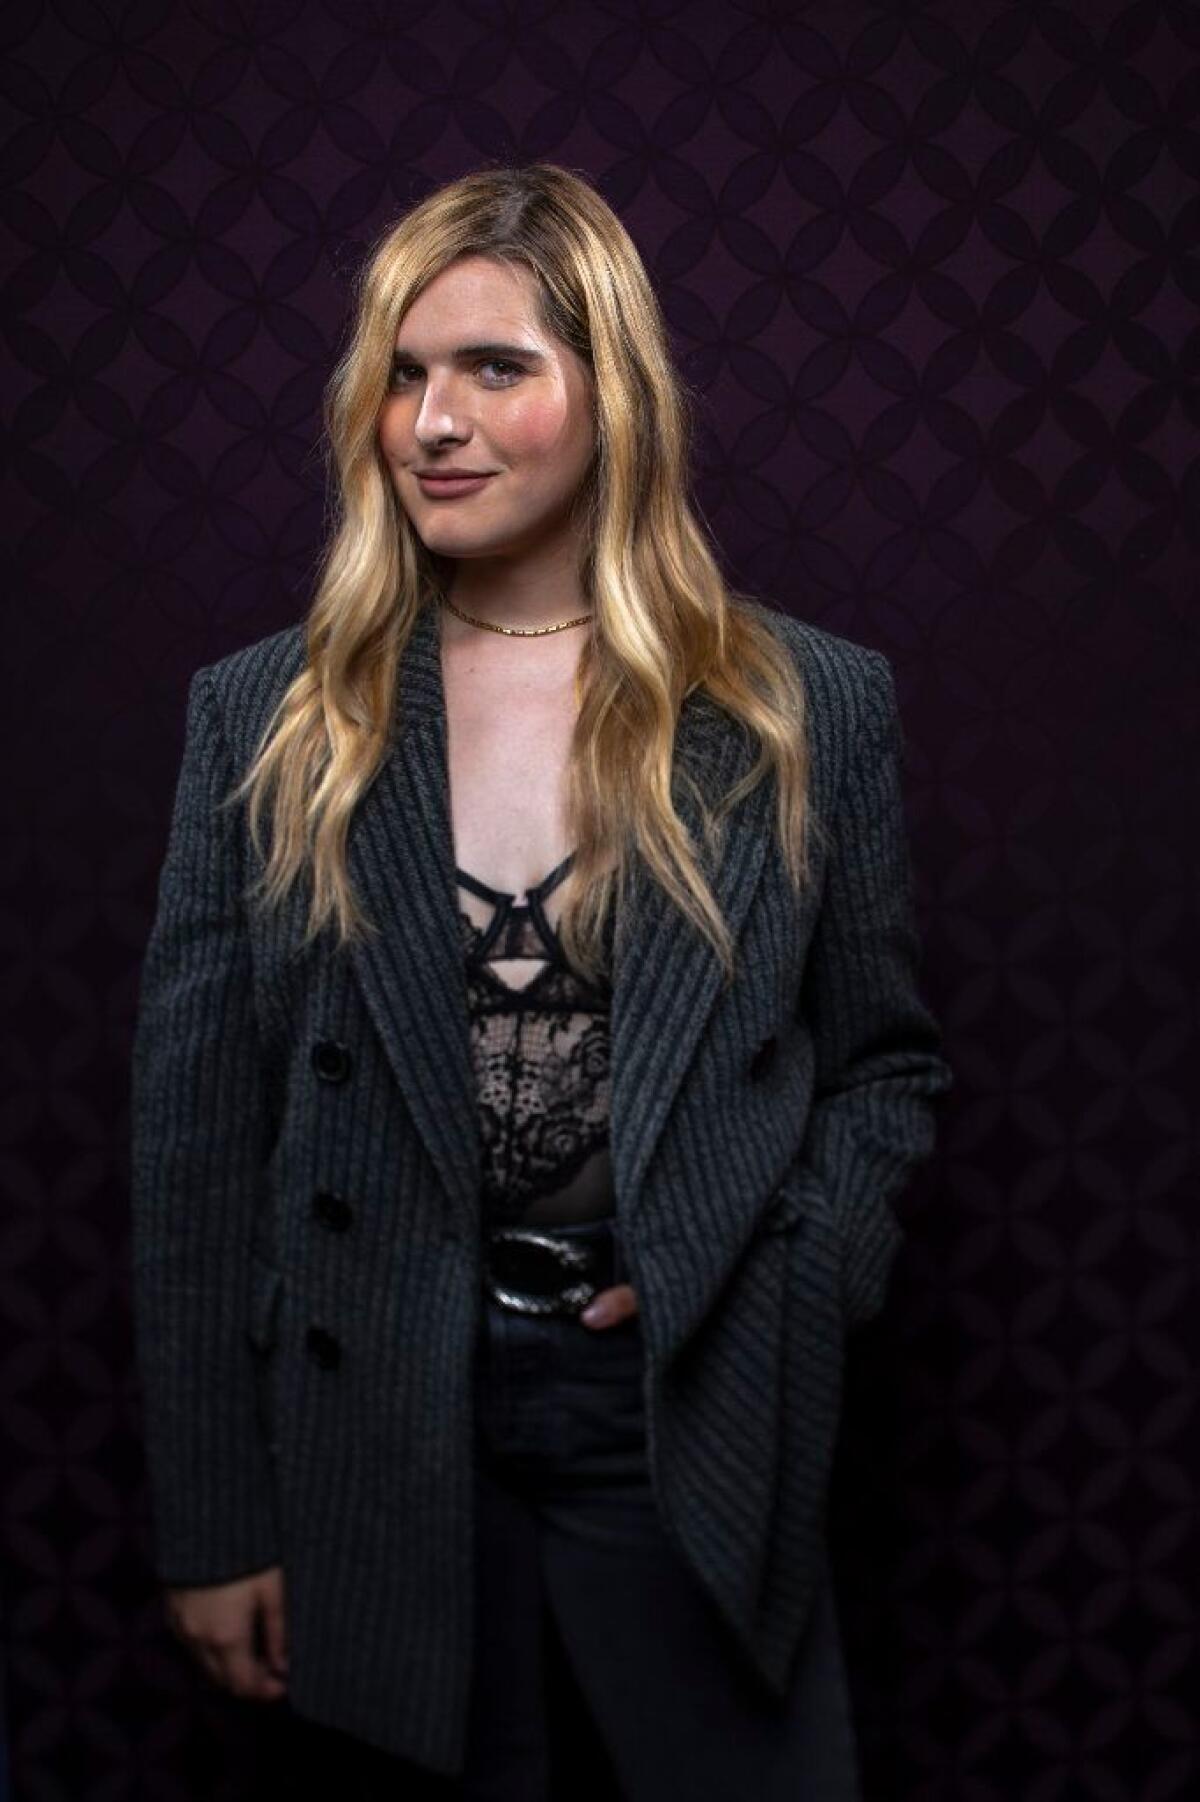 Hari Nef from the film "Assassination Nation" photographed in the L.A. Times Photo and Video Studio at Comic-Con 2018.